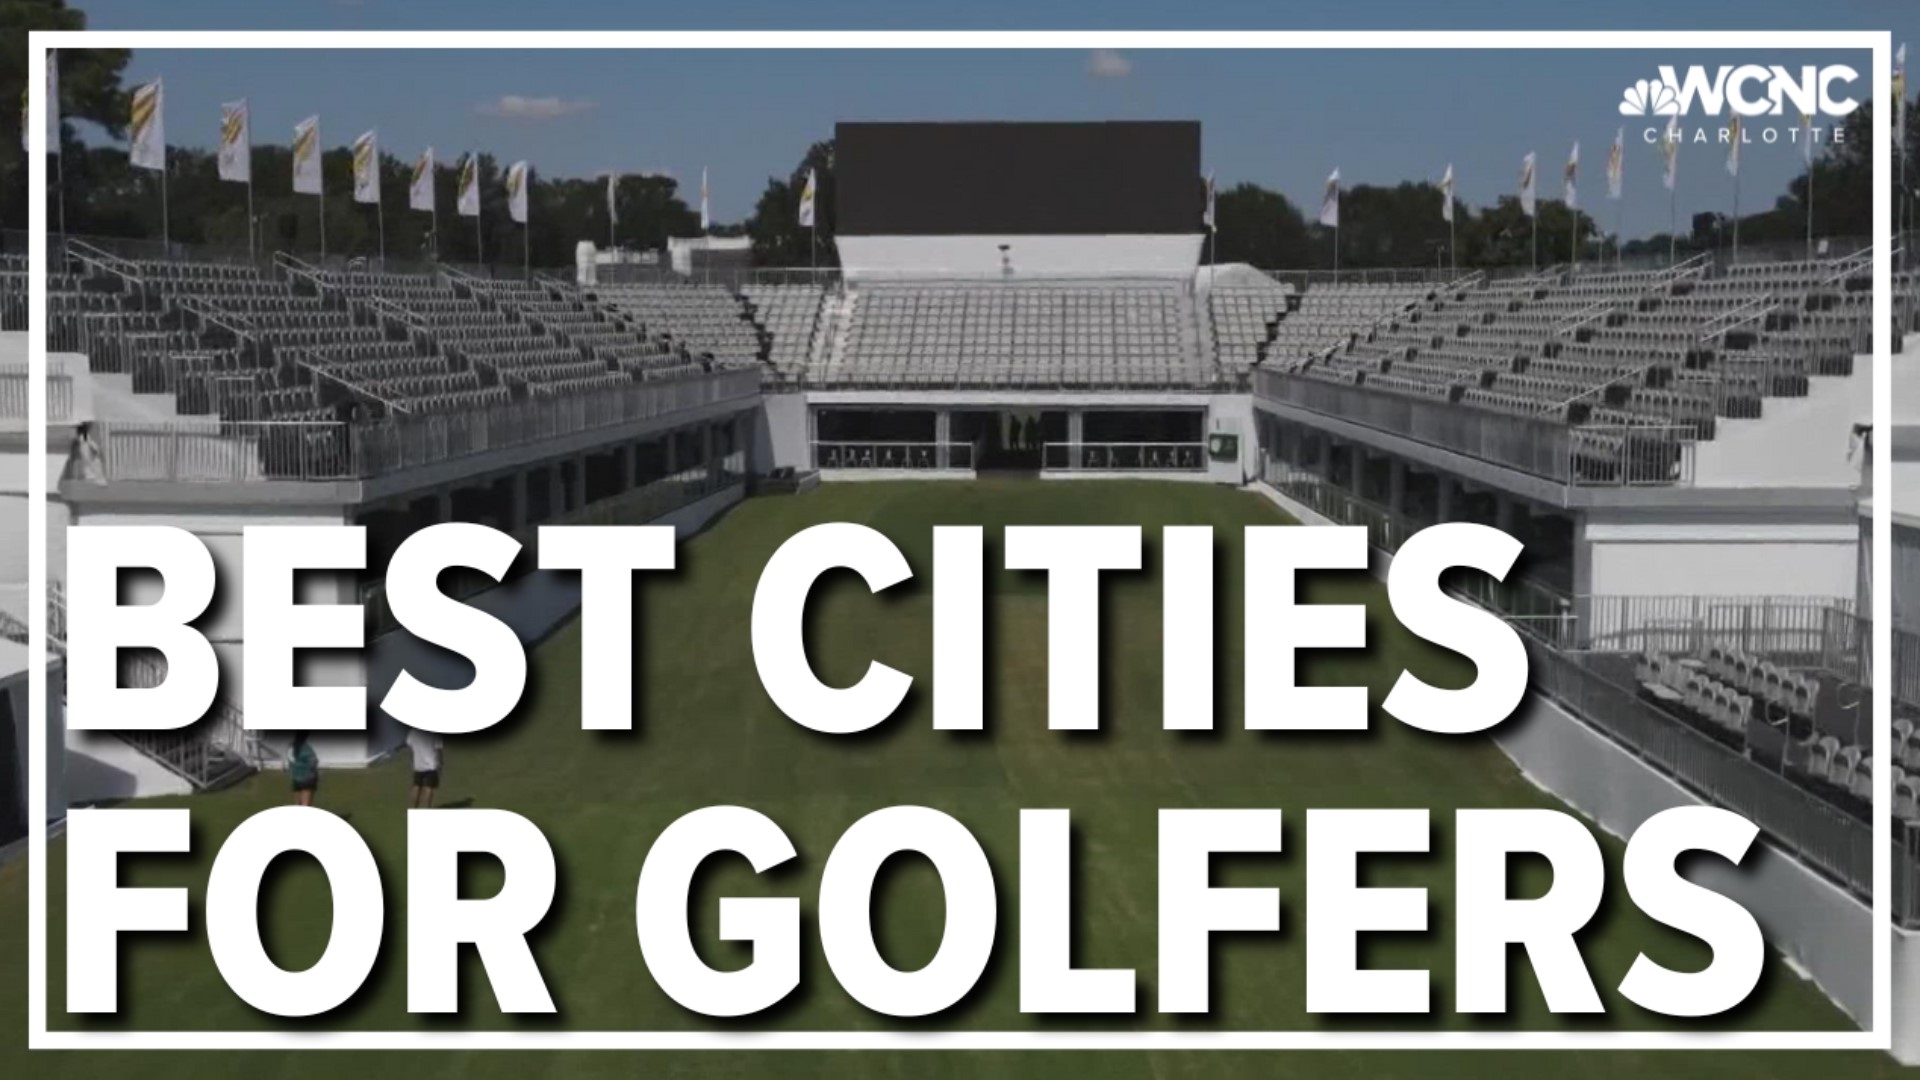 Charlotte was ranked 30th out of 200 cities for best cities for golfers.